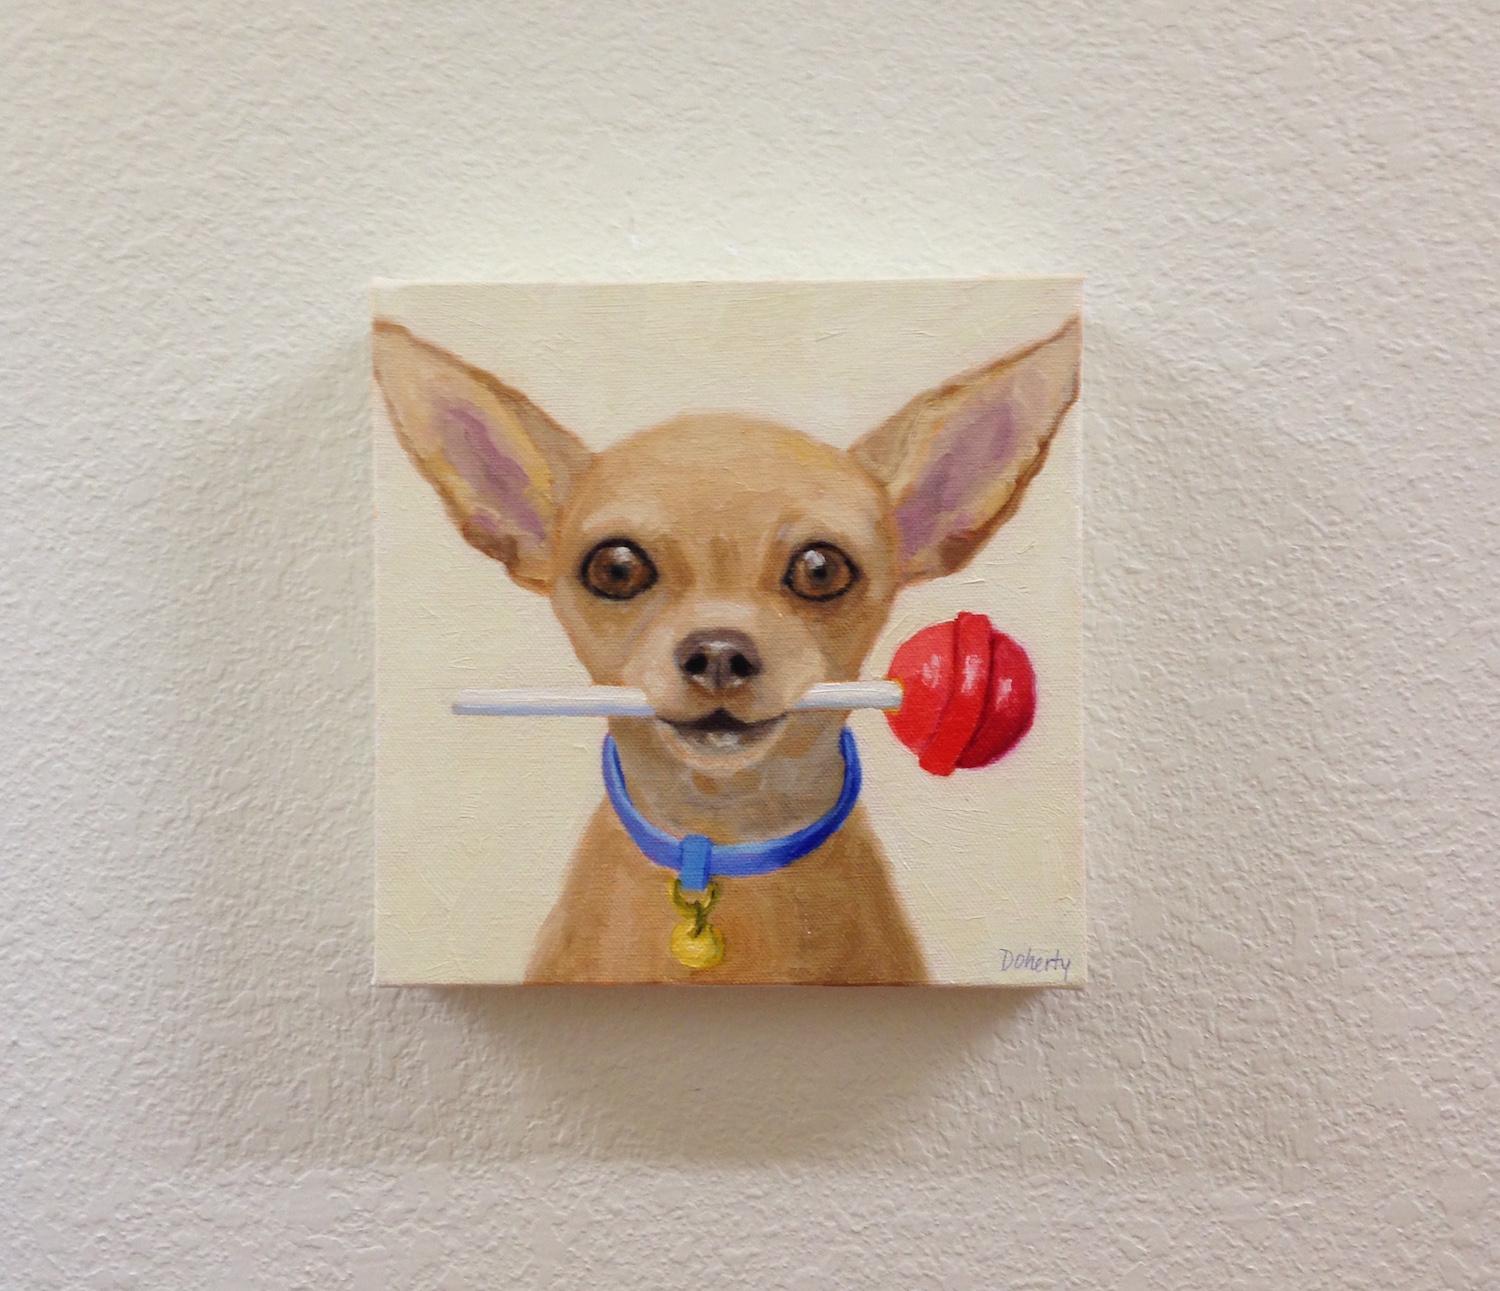 <p>Artist Comments<br>A chihuahua proudly carries a tootsie roll pop. Her direct gaze may indicate the treat as a gift for her owner, or as permission to enjoy the treat. Part of Pat Doherty's new series pairing dogs with tempting treats. These